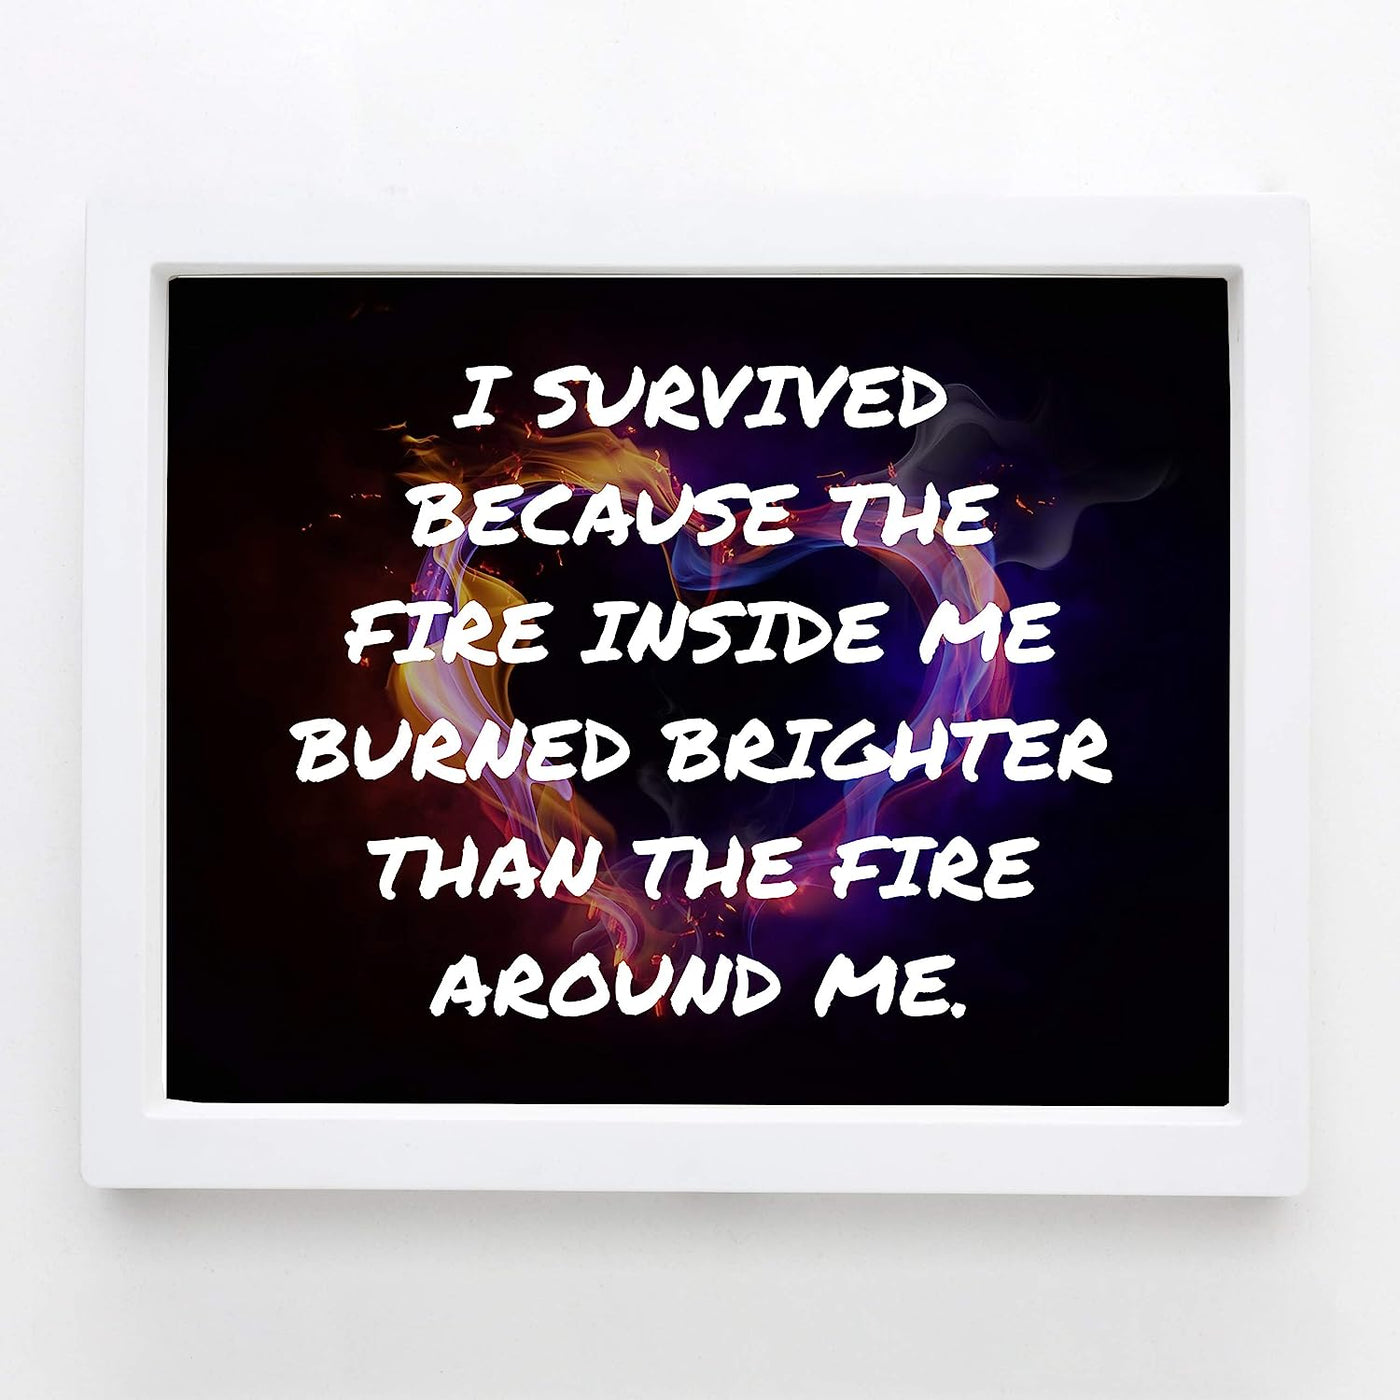 I Survived Because The Fire Inside Me Motivational Quotes Wall Art -10 x 8" Flaming Heart Design Print-Ready to Frame. Inspirational Home-Office-School-Dorm Decor. Great Advice for Inspiration!